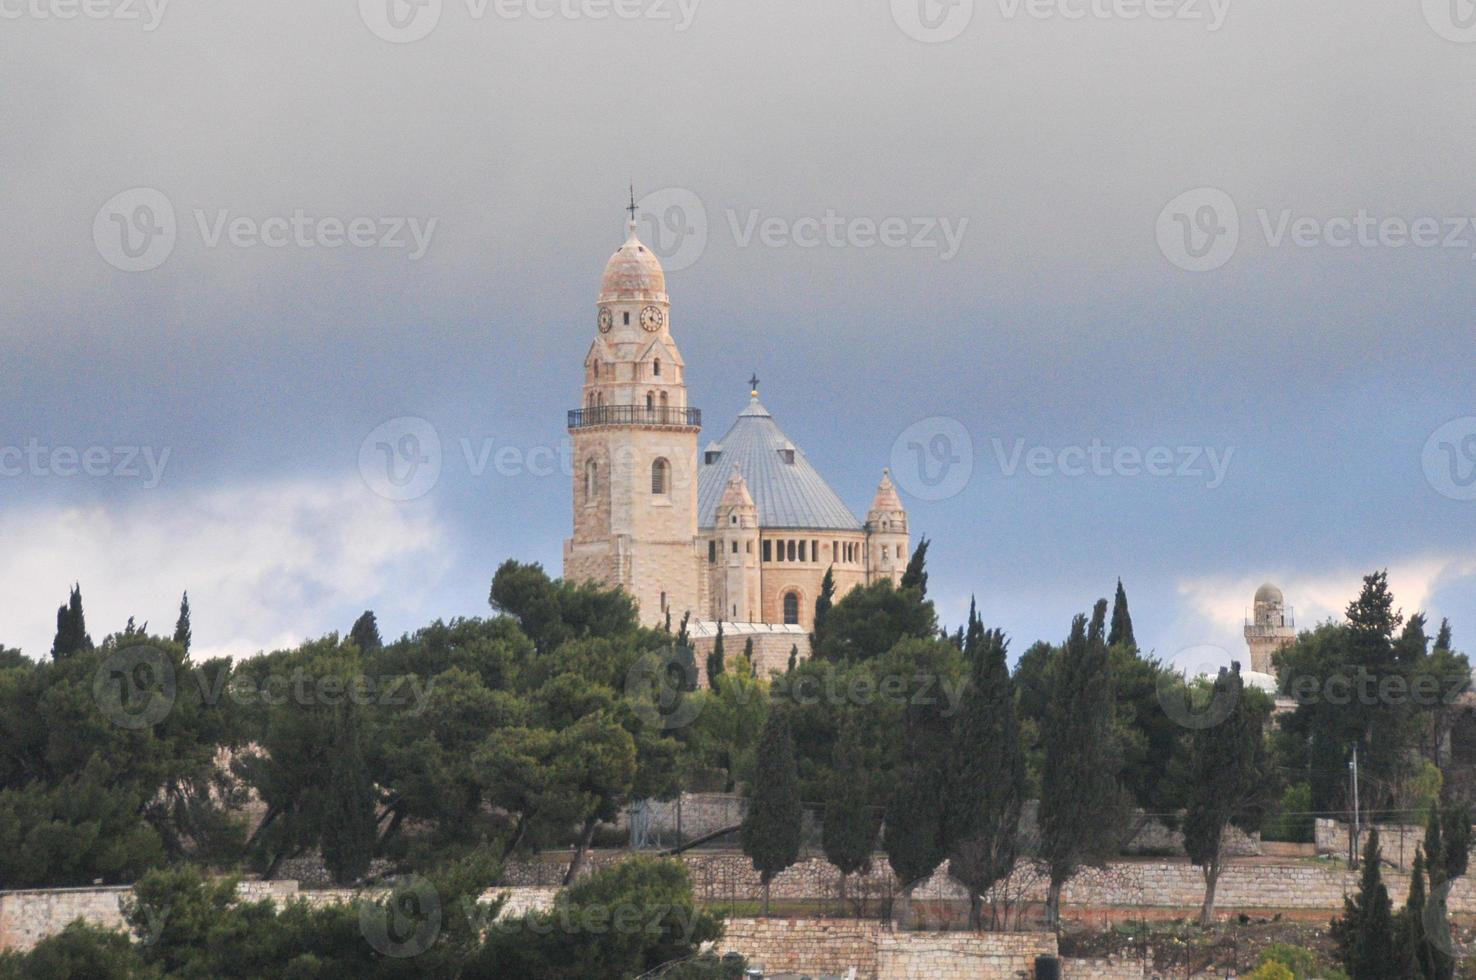 Mount Zion and the Abbey of the Dormition, Israel photo